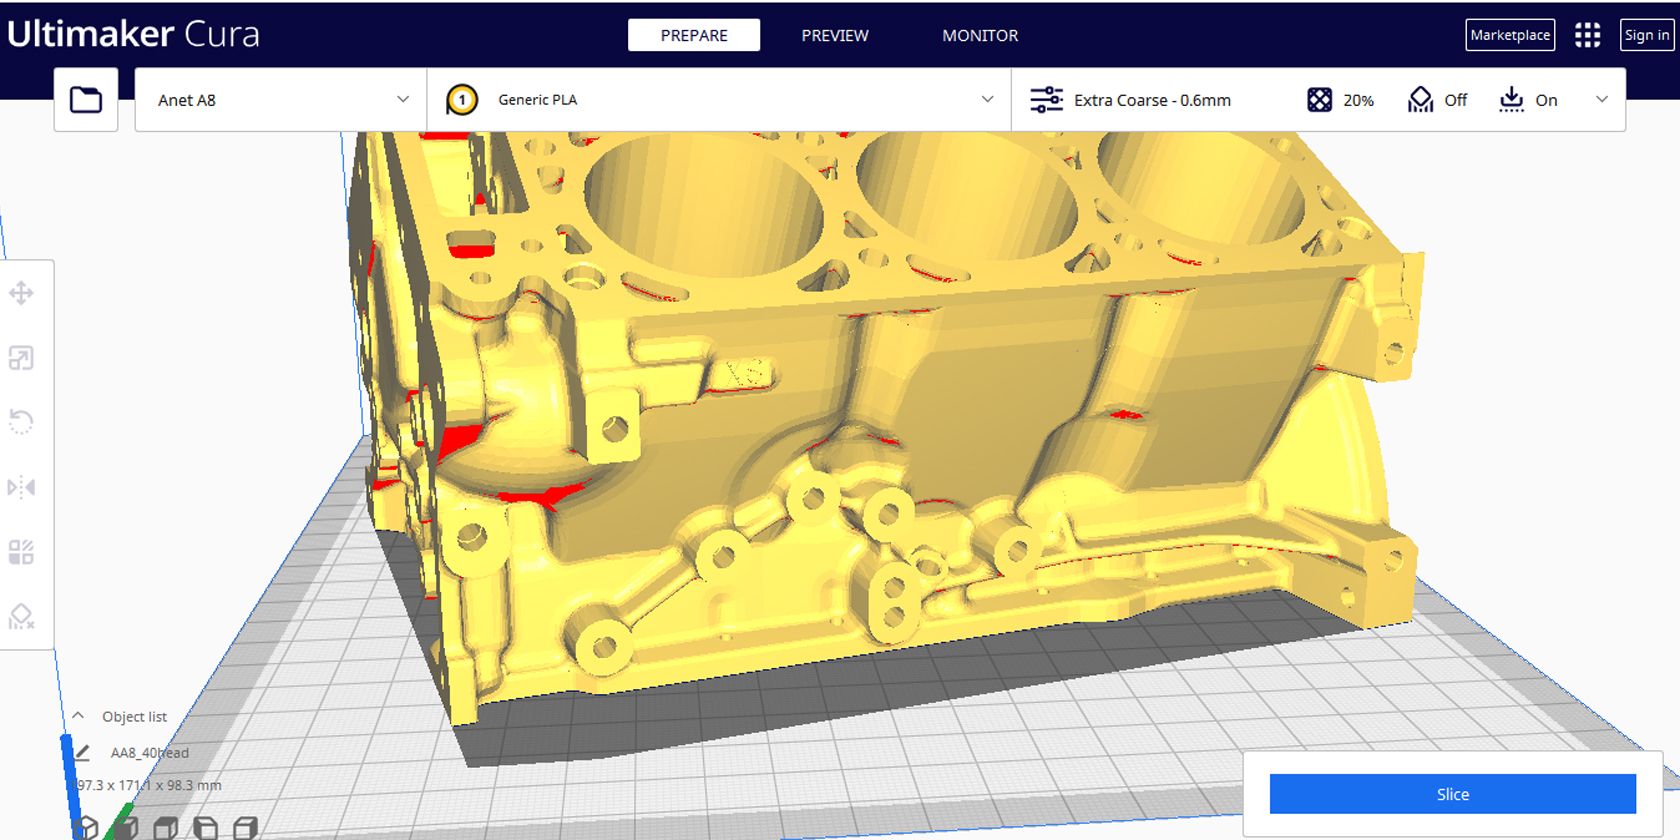 A 3D model of an engine in cura slicer being prepared for 3D slicing